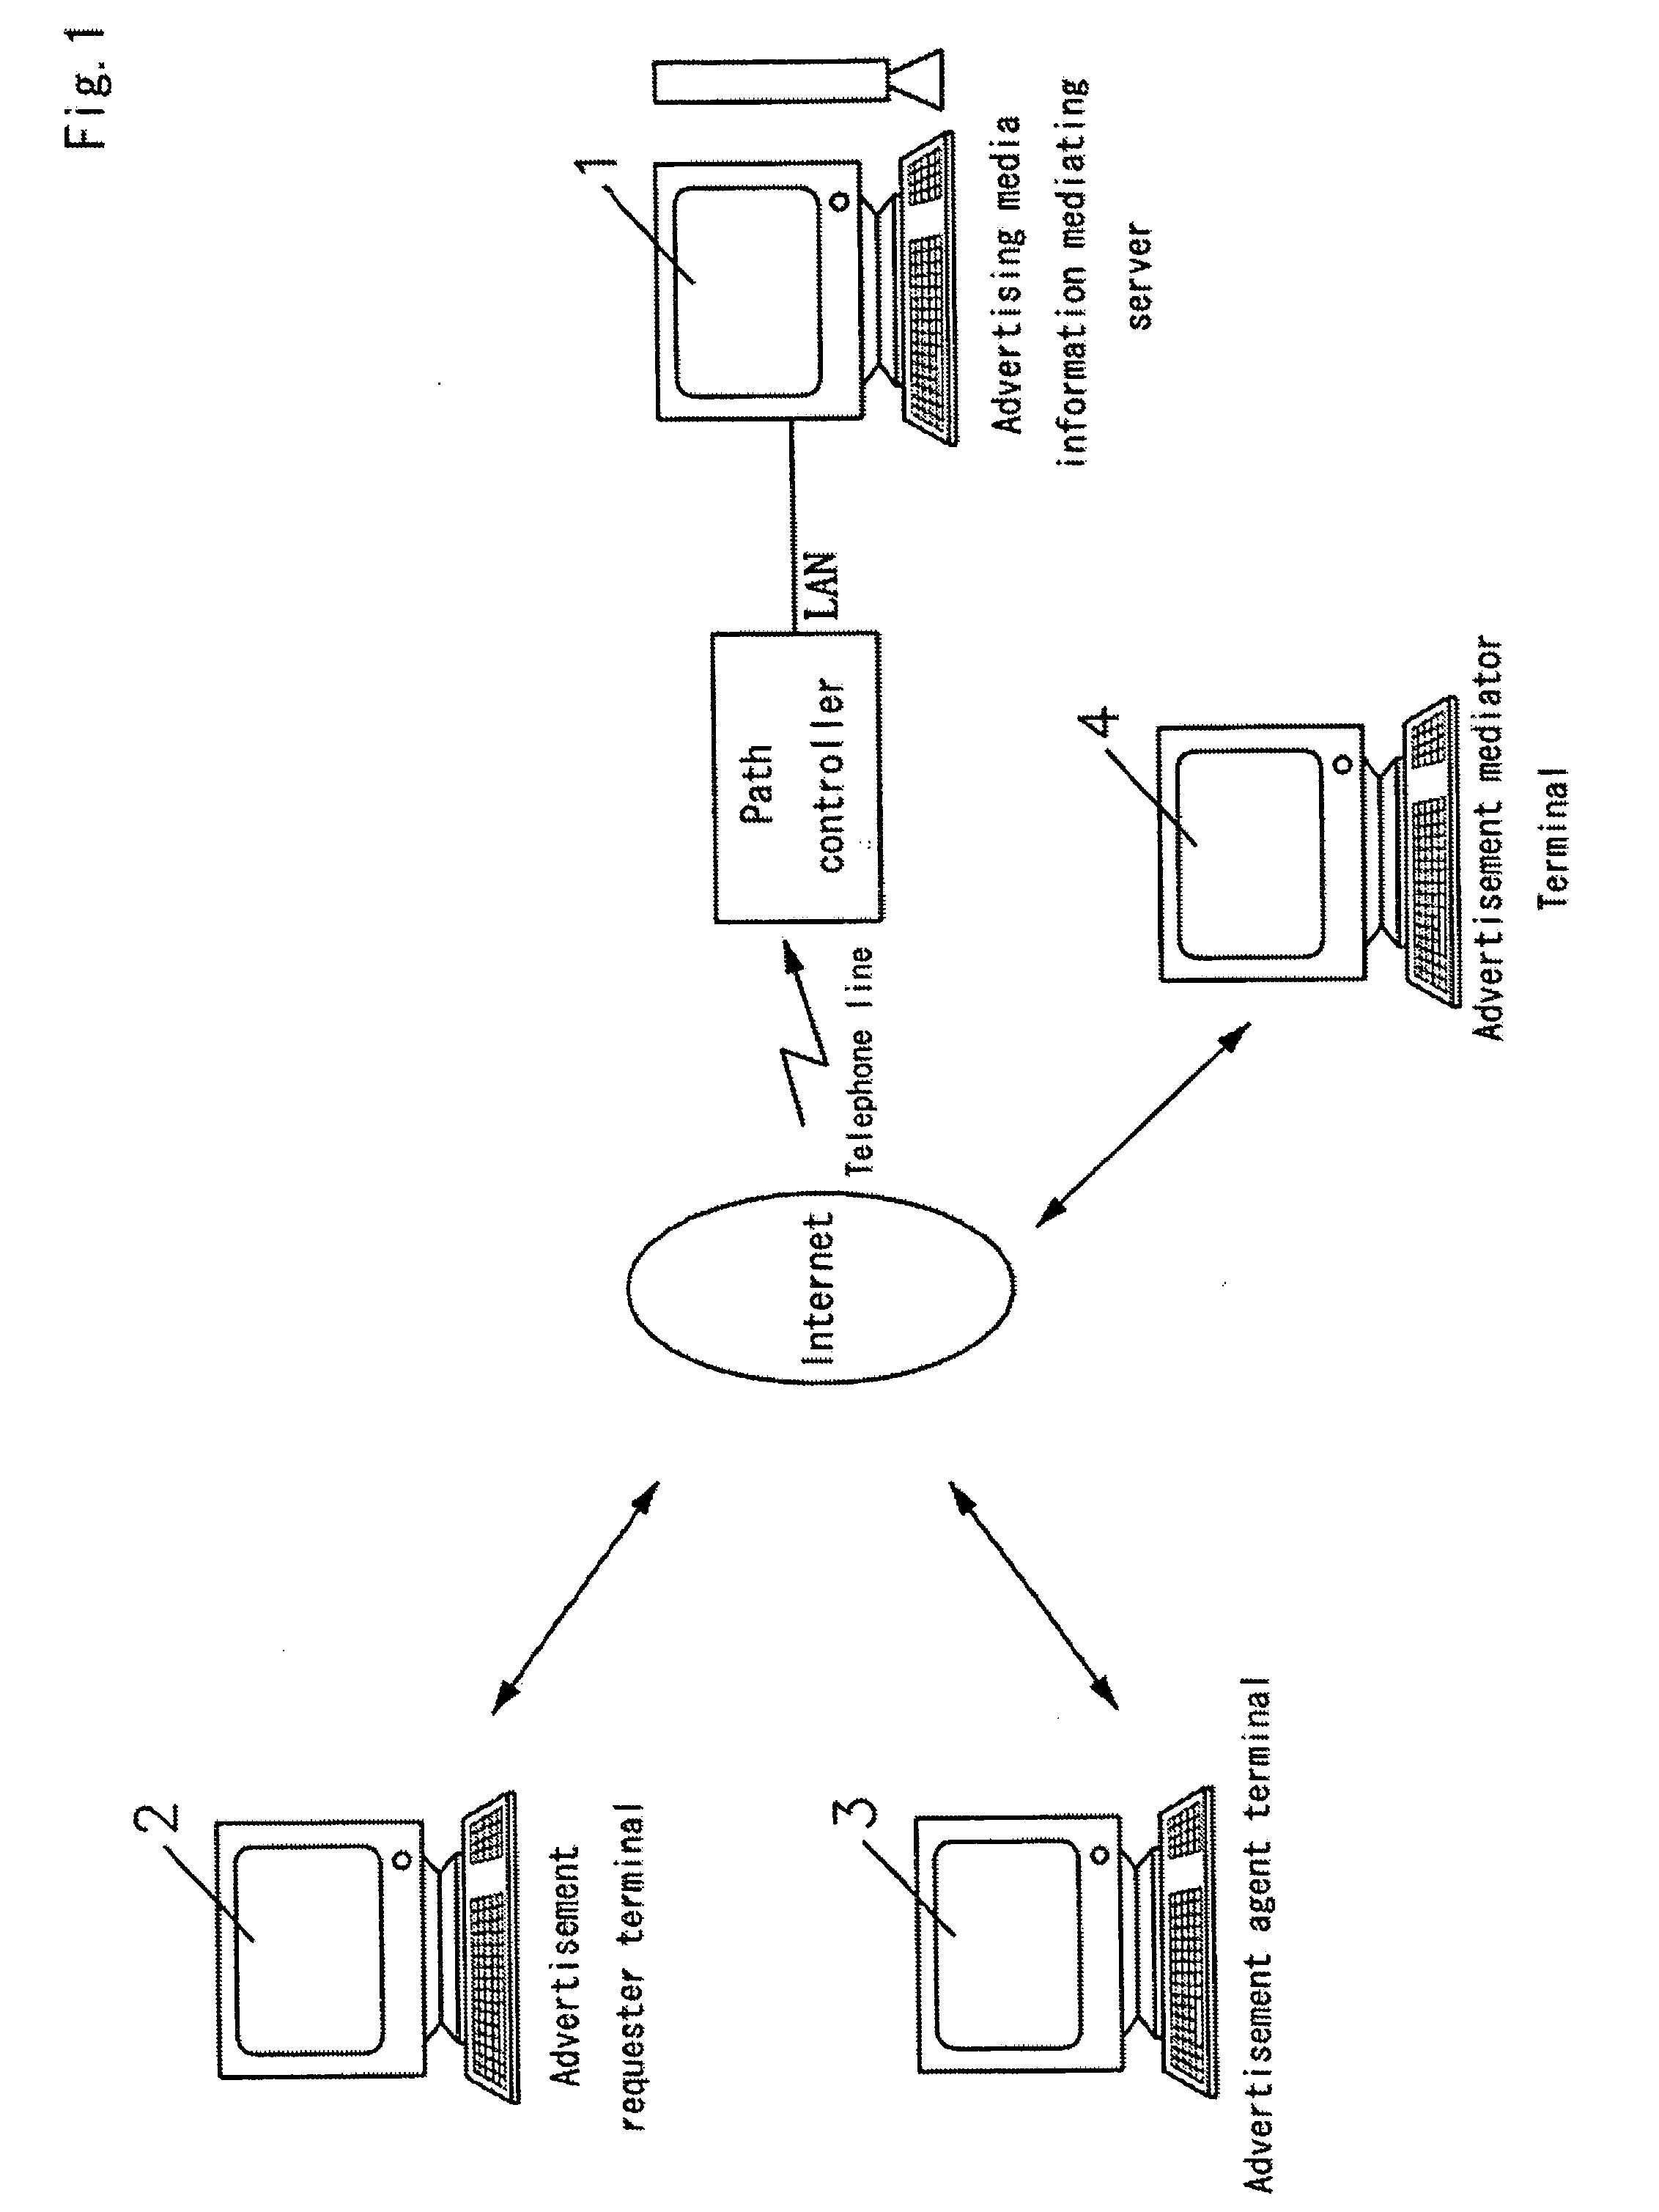 Advertisement proxy method and advertisement proxy mediating system